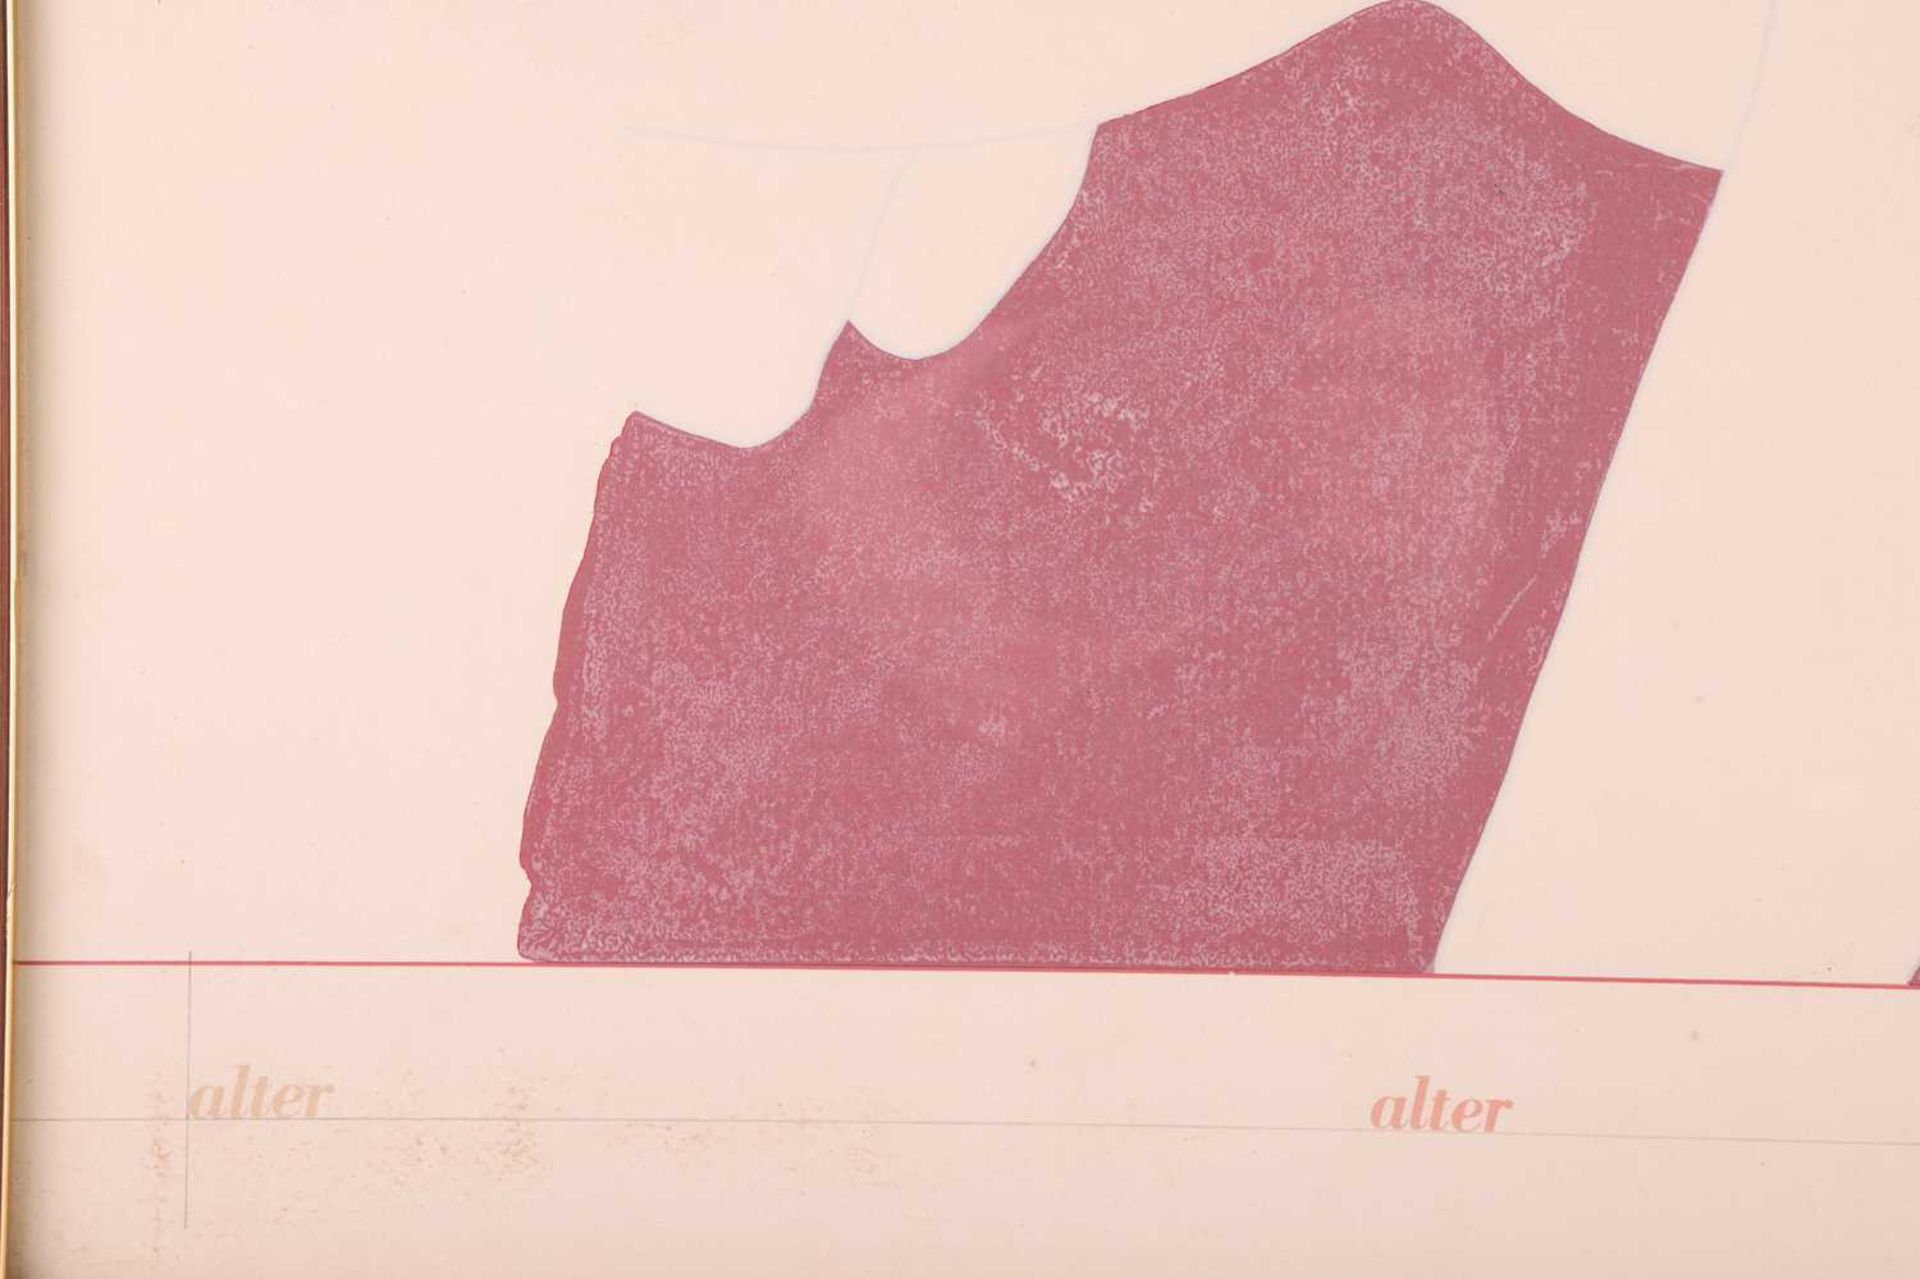 Derrick Greaves (1927-2002), 'Alter Alter Also There', screenprint, unsigned, 46 cm x 62 cm, framed  - Image 2 of 5